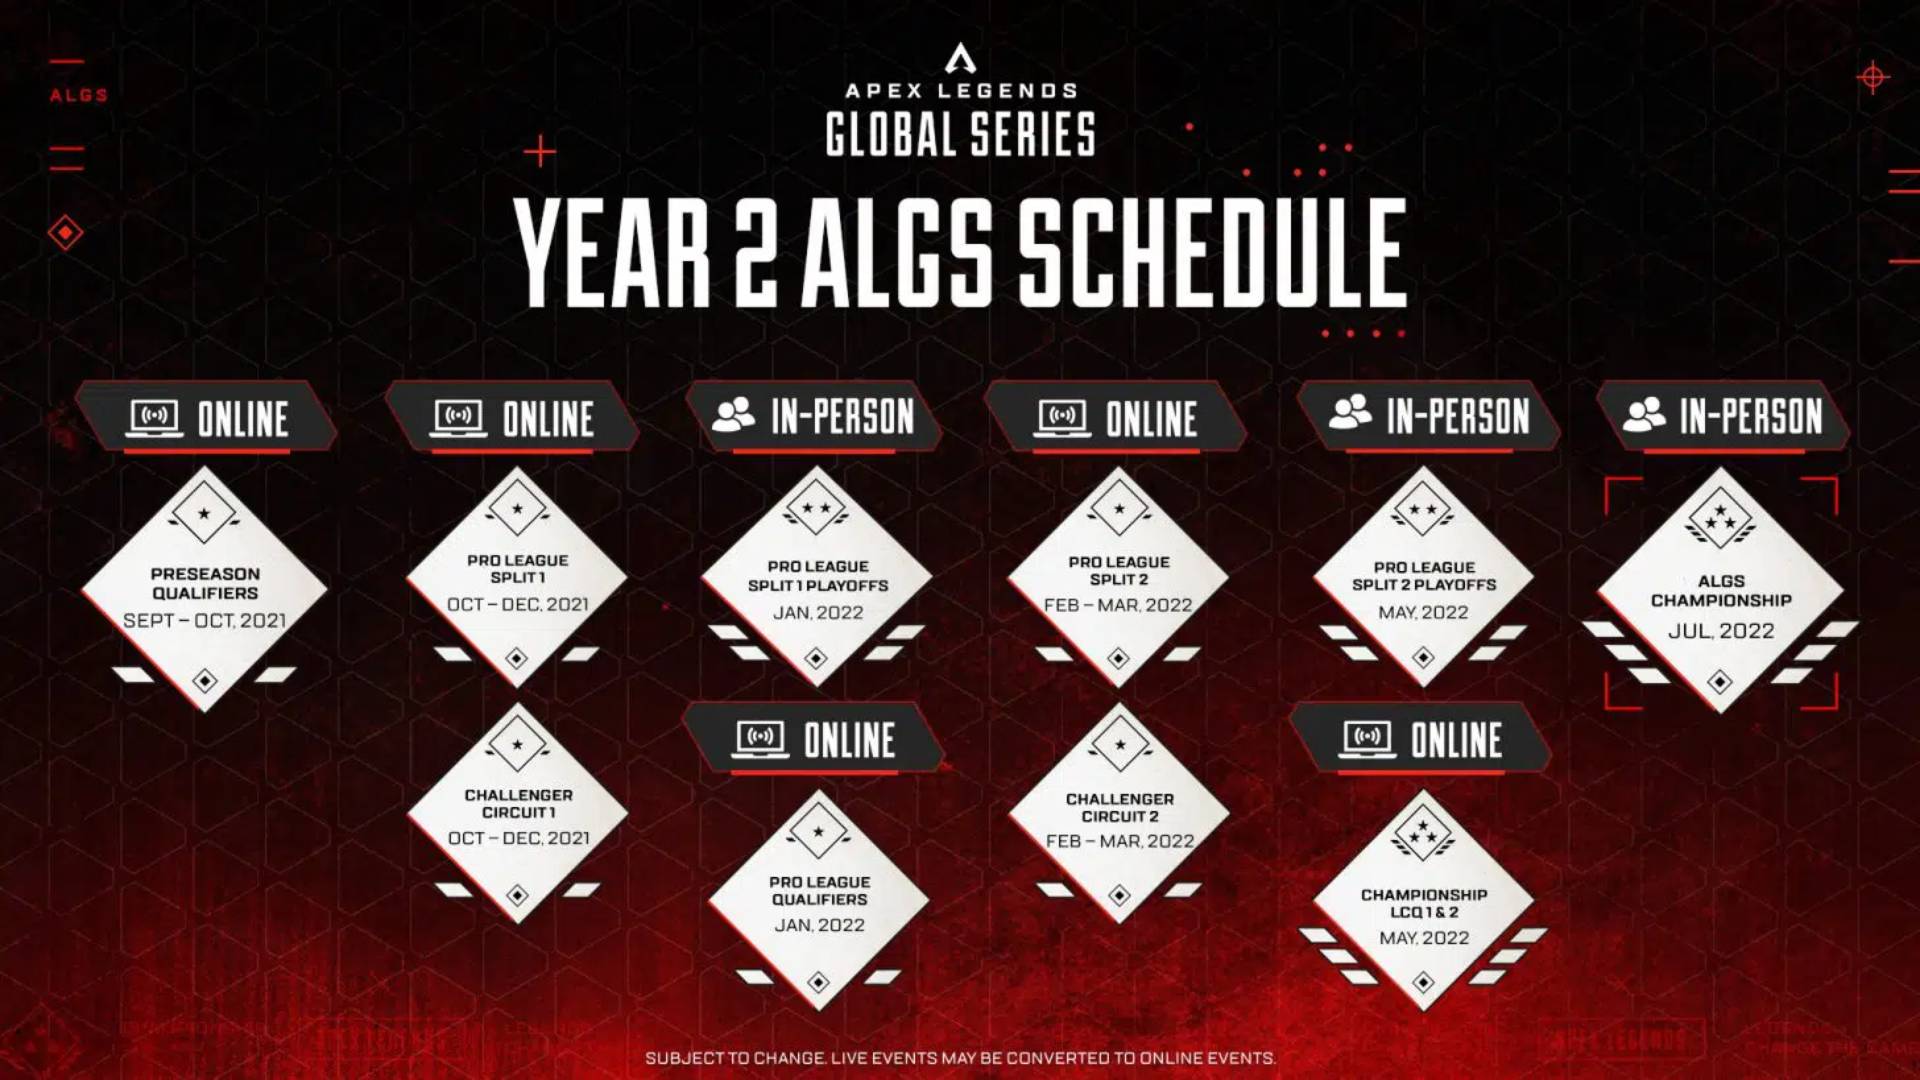 Apex Legends Global Series Year 2 5 million prize pool, console